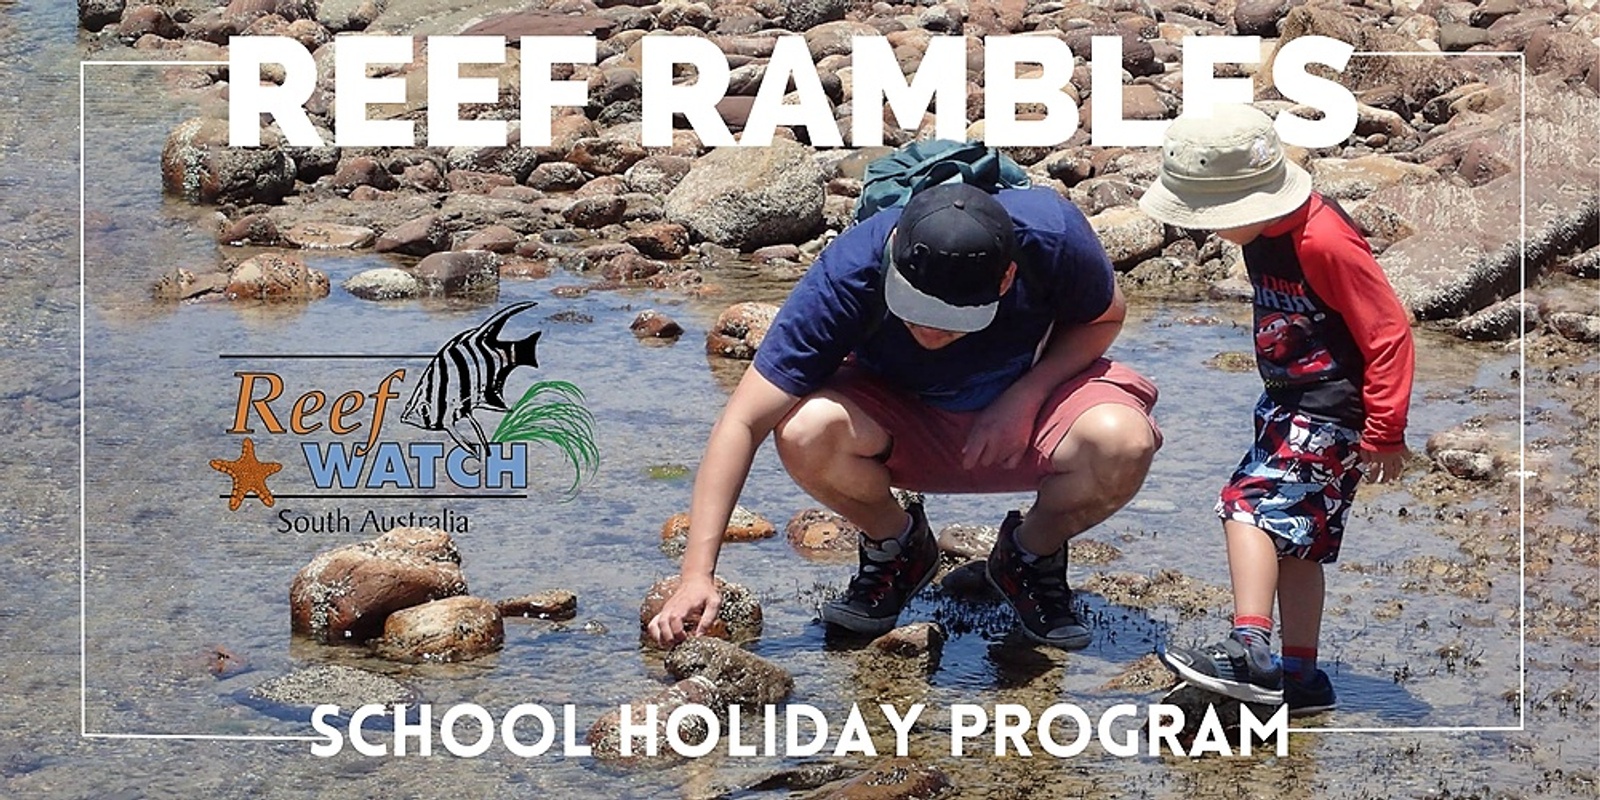 School Holiday Reef Rambles at Hallett Cove - Wednesday April 19